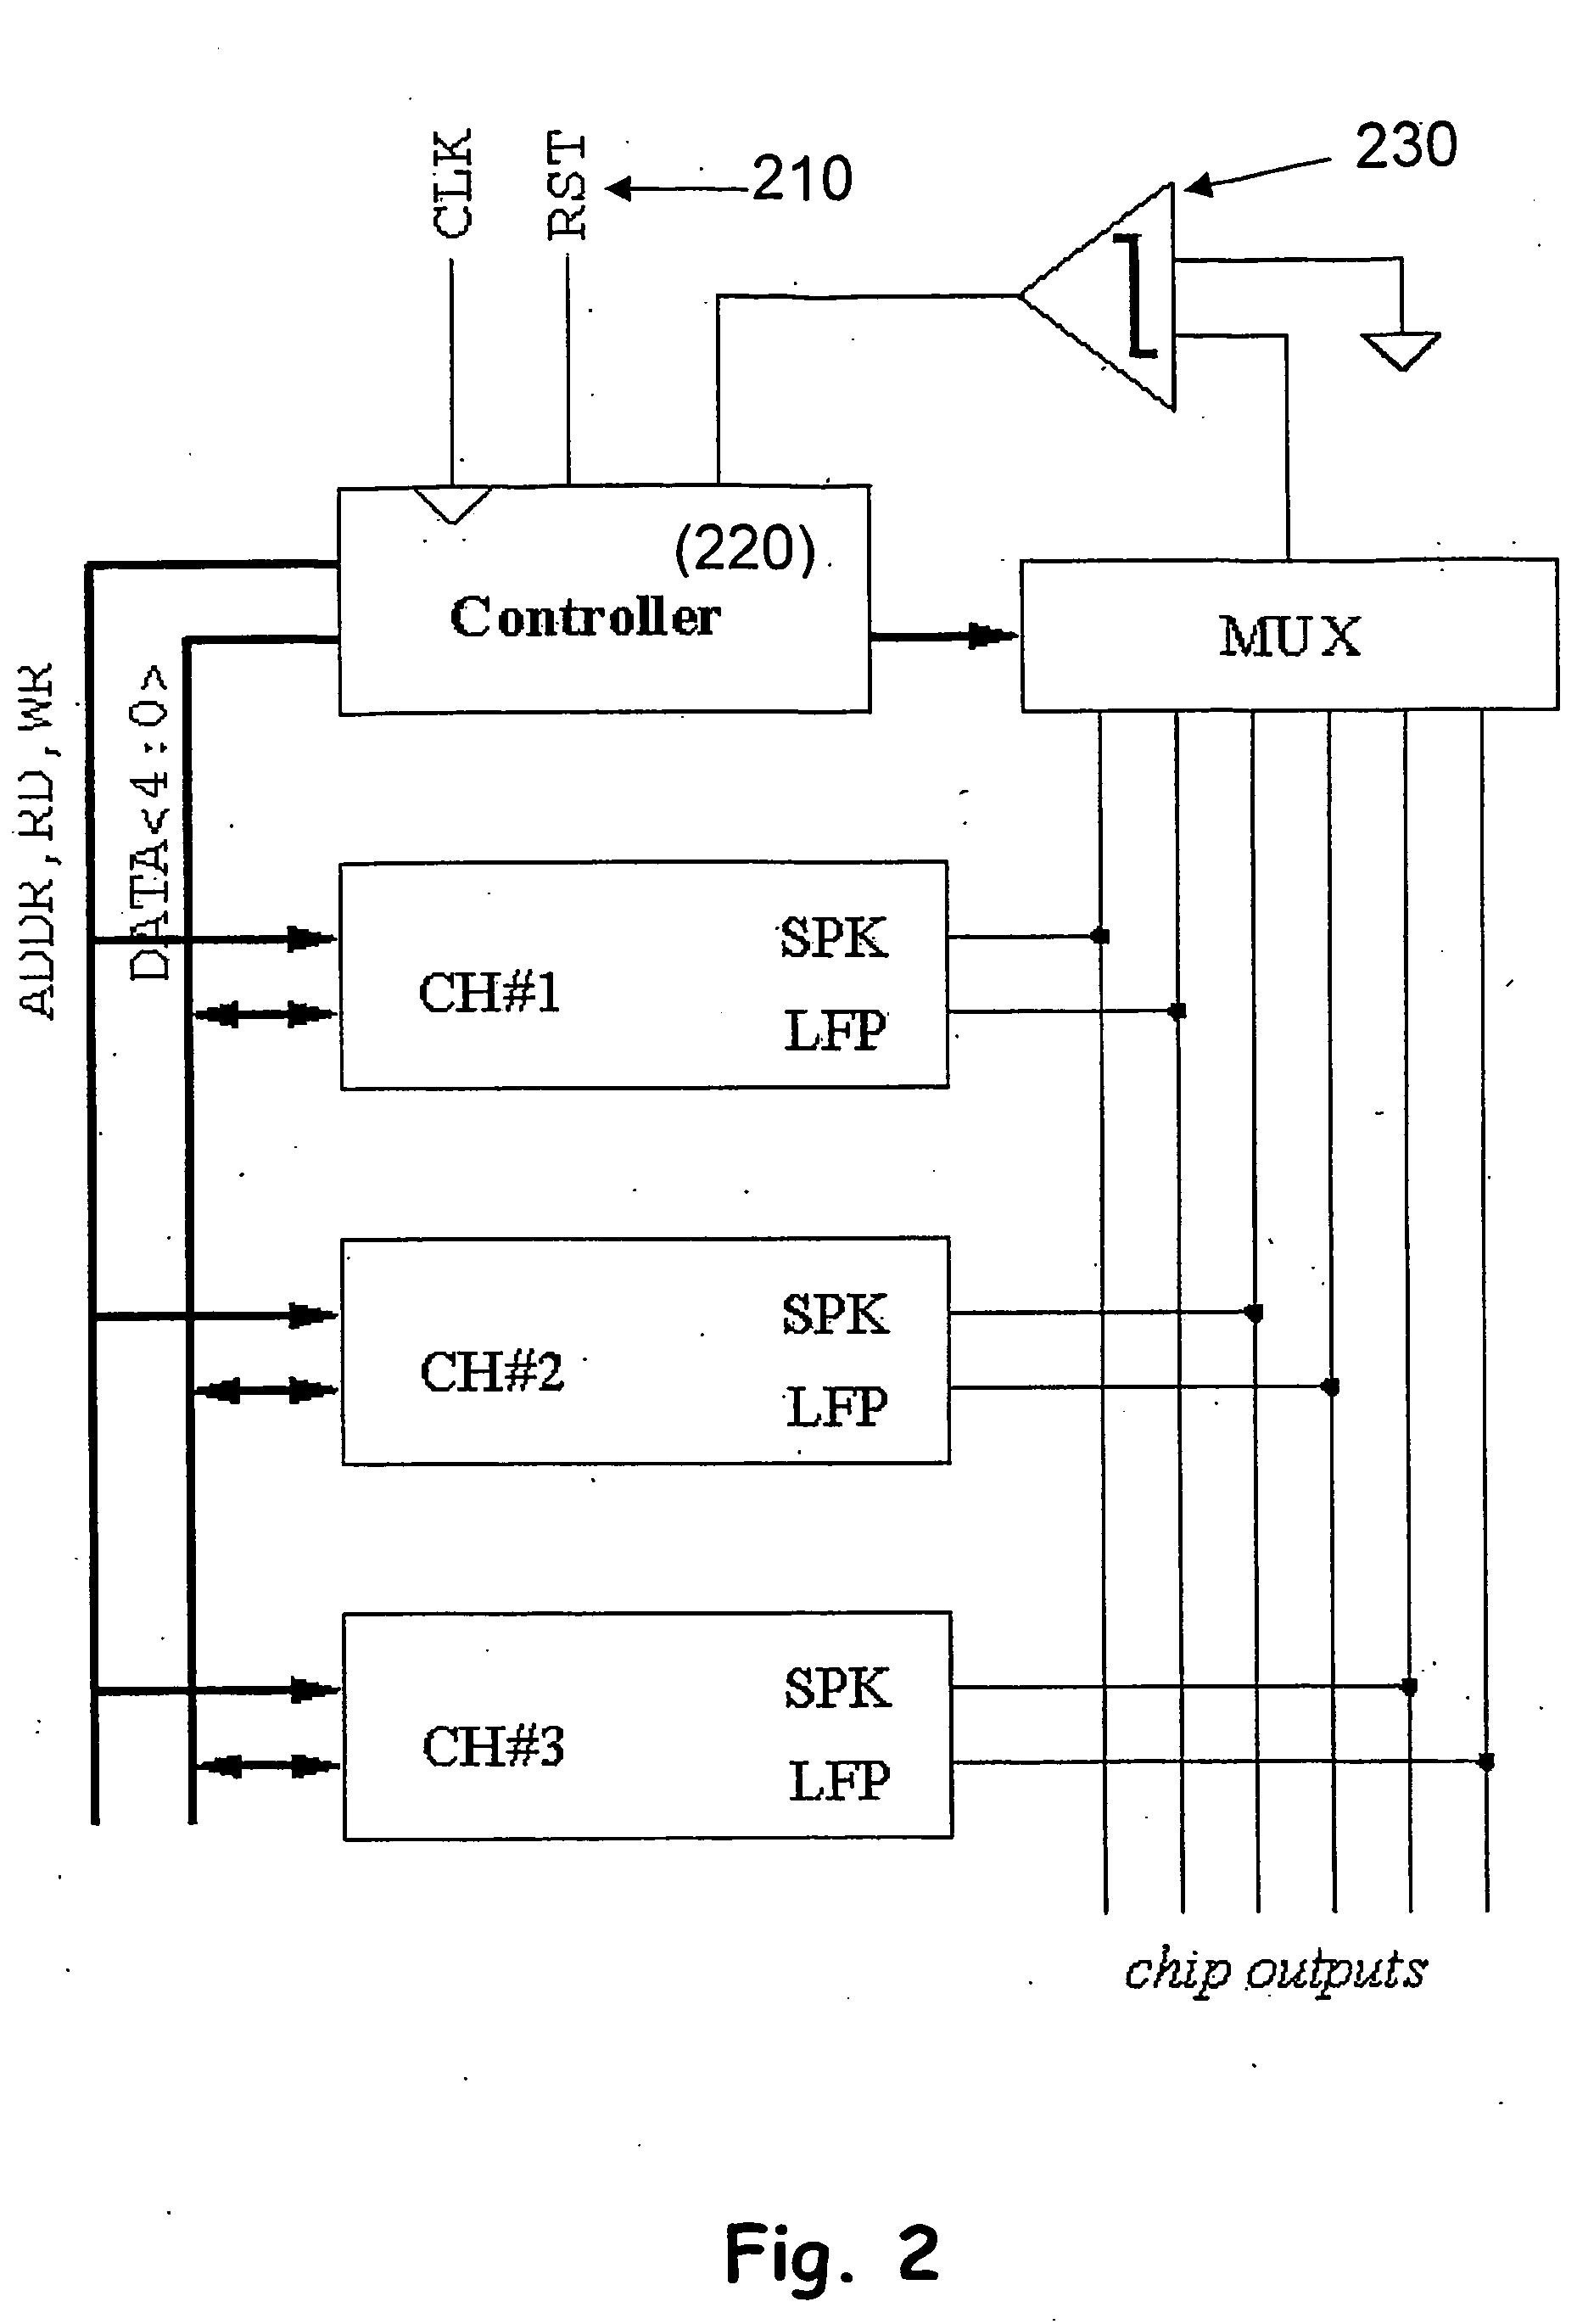 Integrated system and method for multichannel neuronal recording with spike/lfp separation, integrated a/d conversion and threshold detection